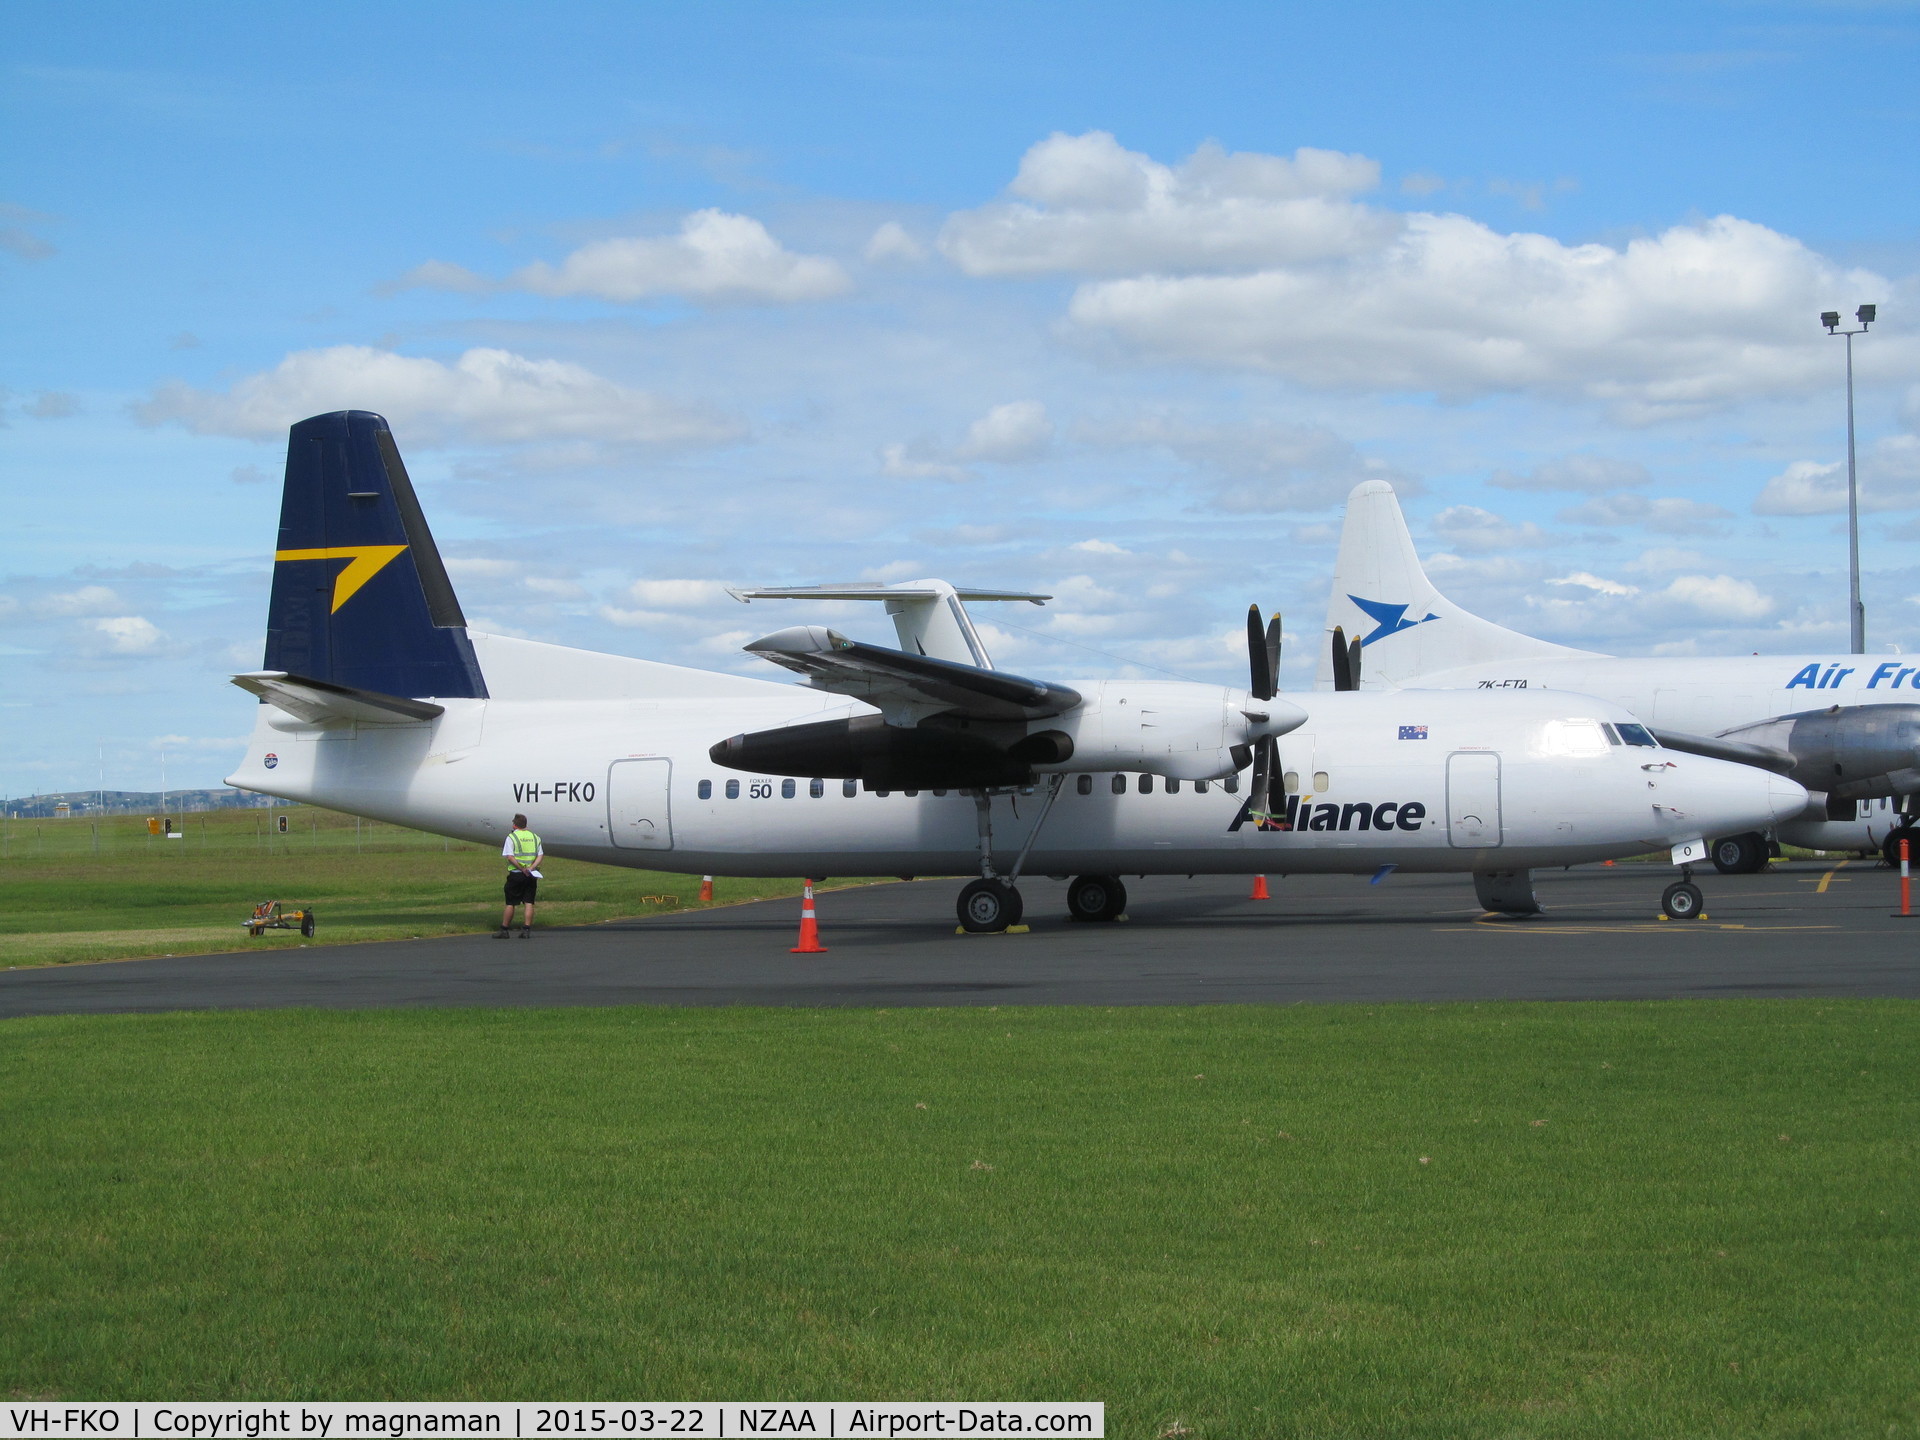 VH-FKO, 1989 Fokker 50 C/N 20160, not sure how much longer this will be based in NZ